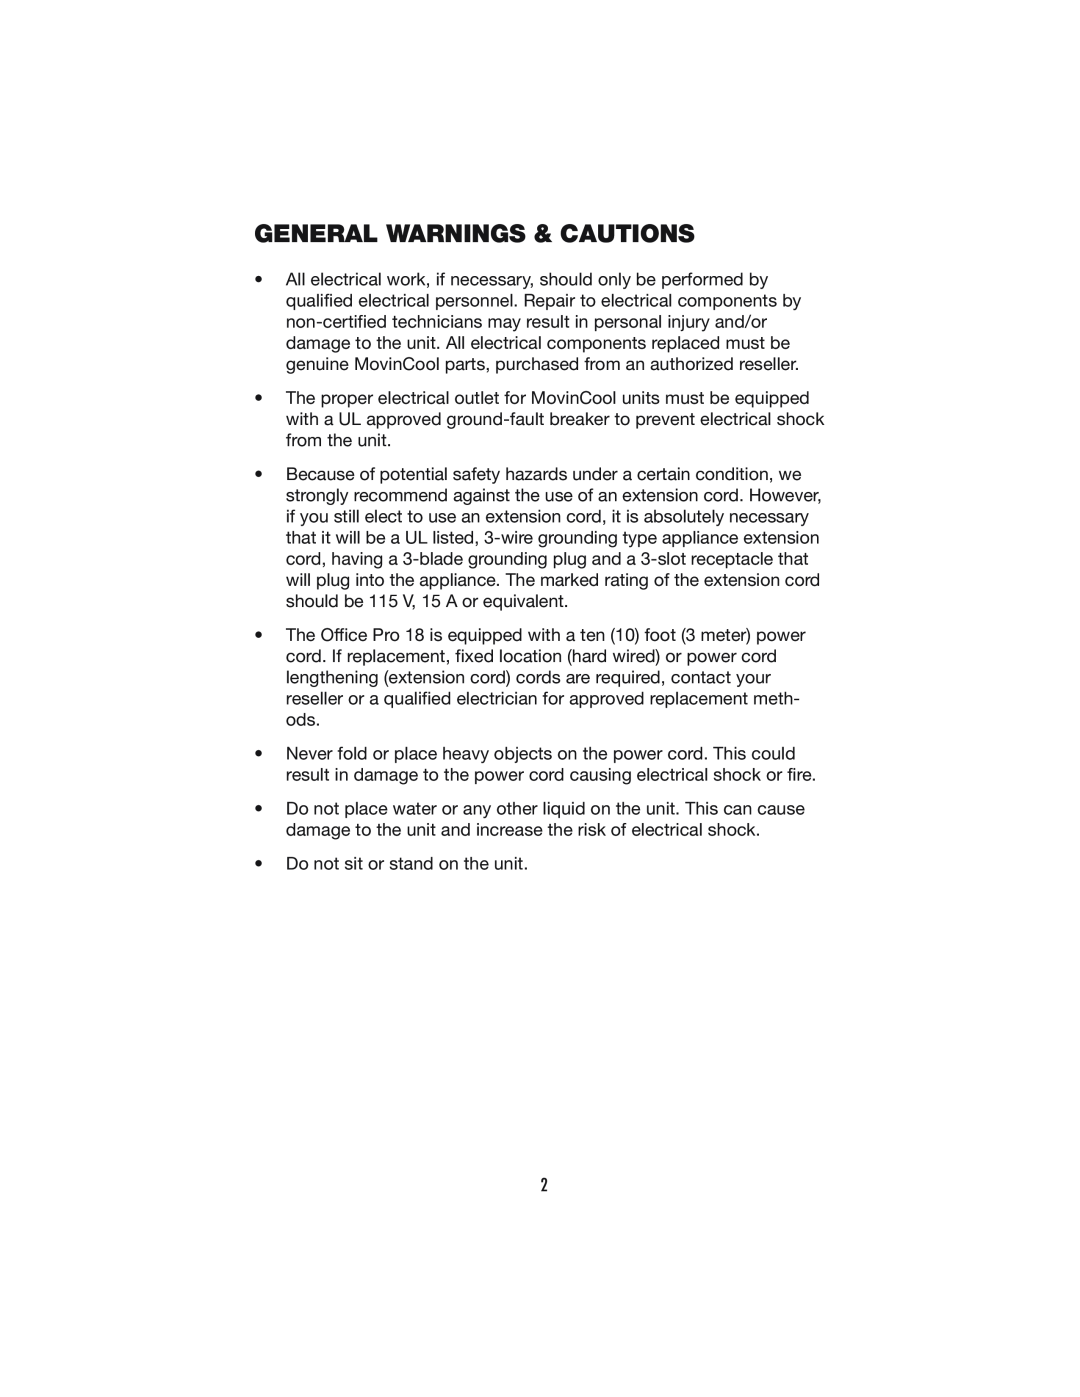 Denso PRO 18 operation manual General Warnings & Cautions 